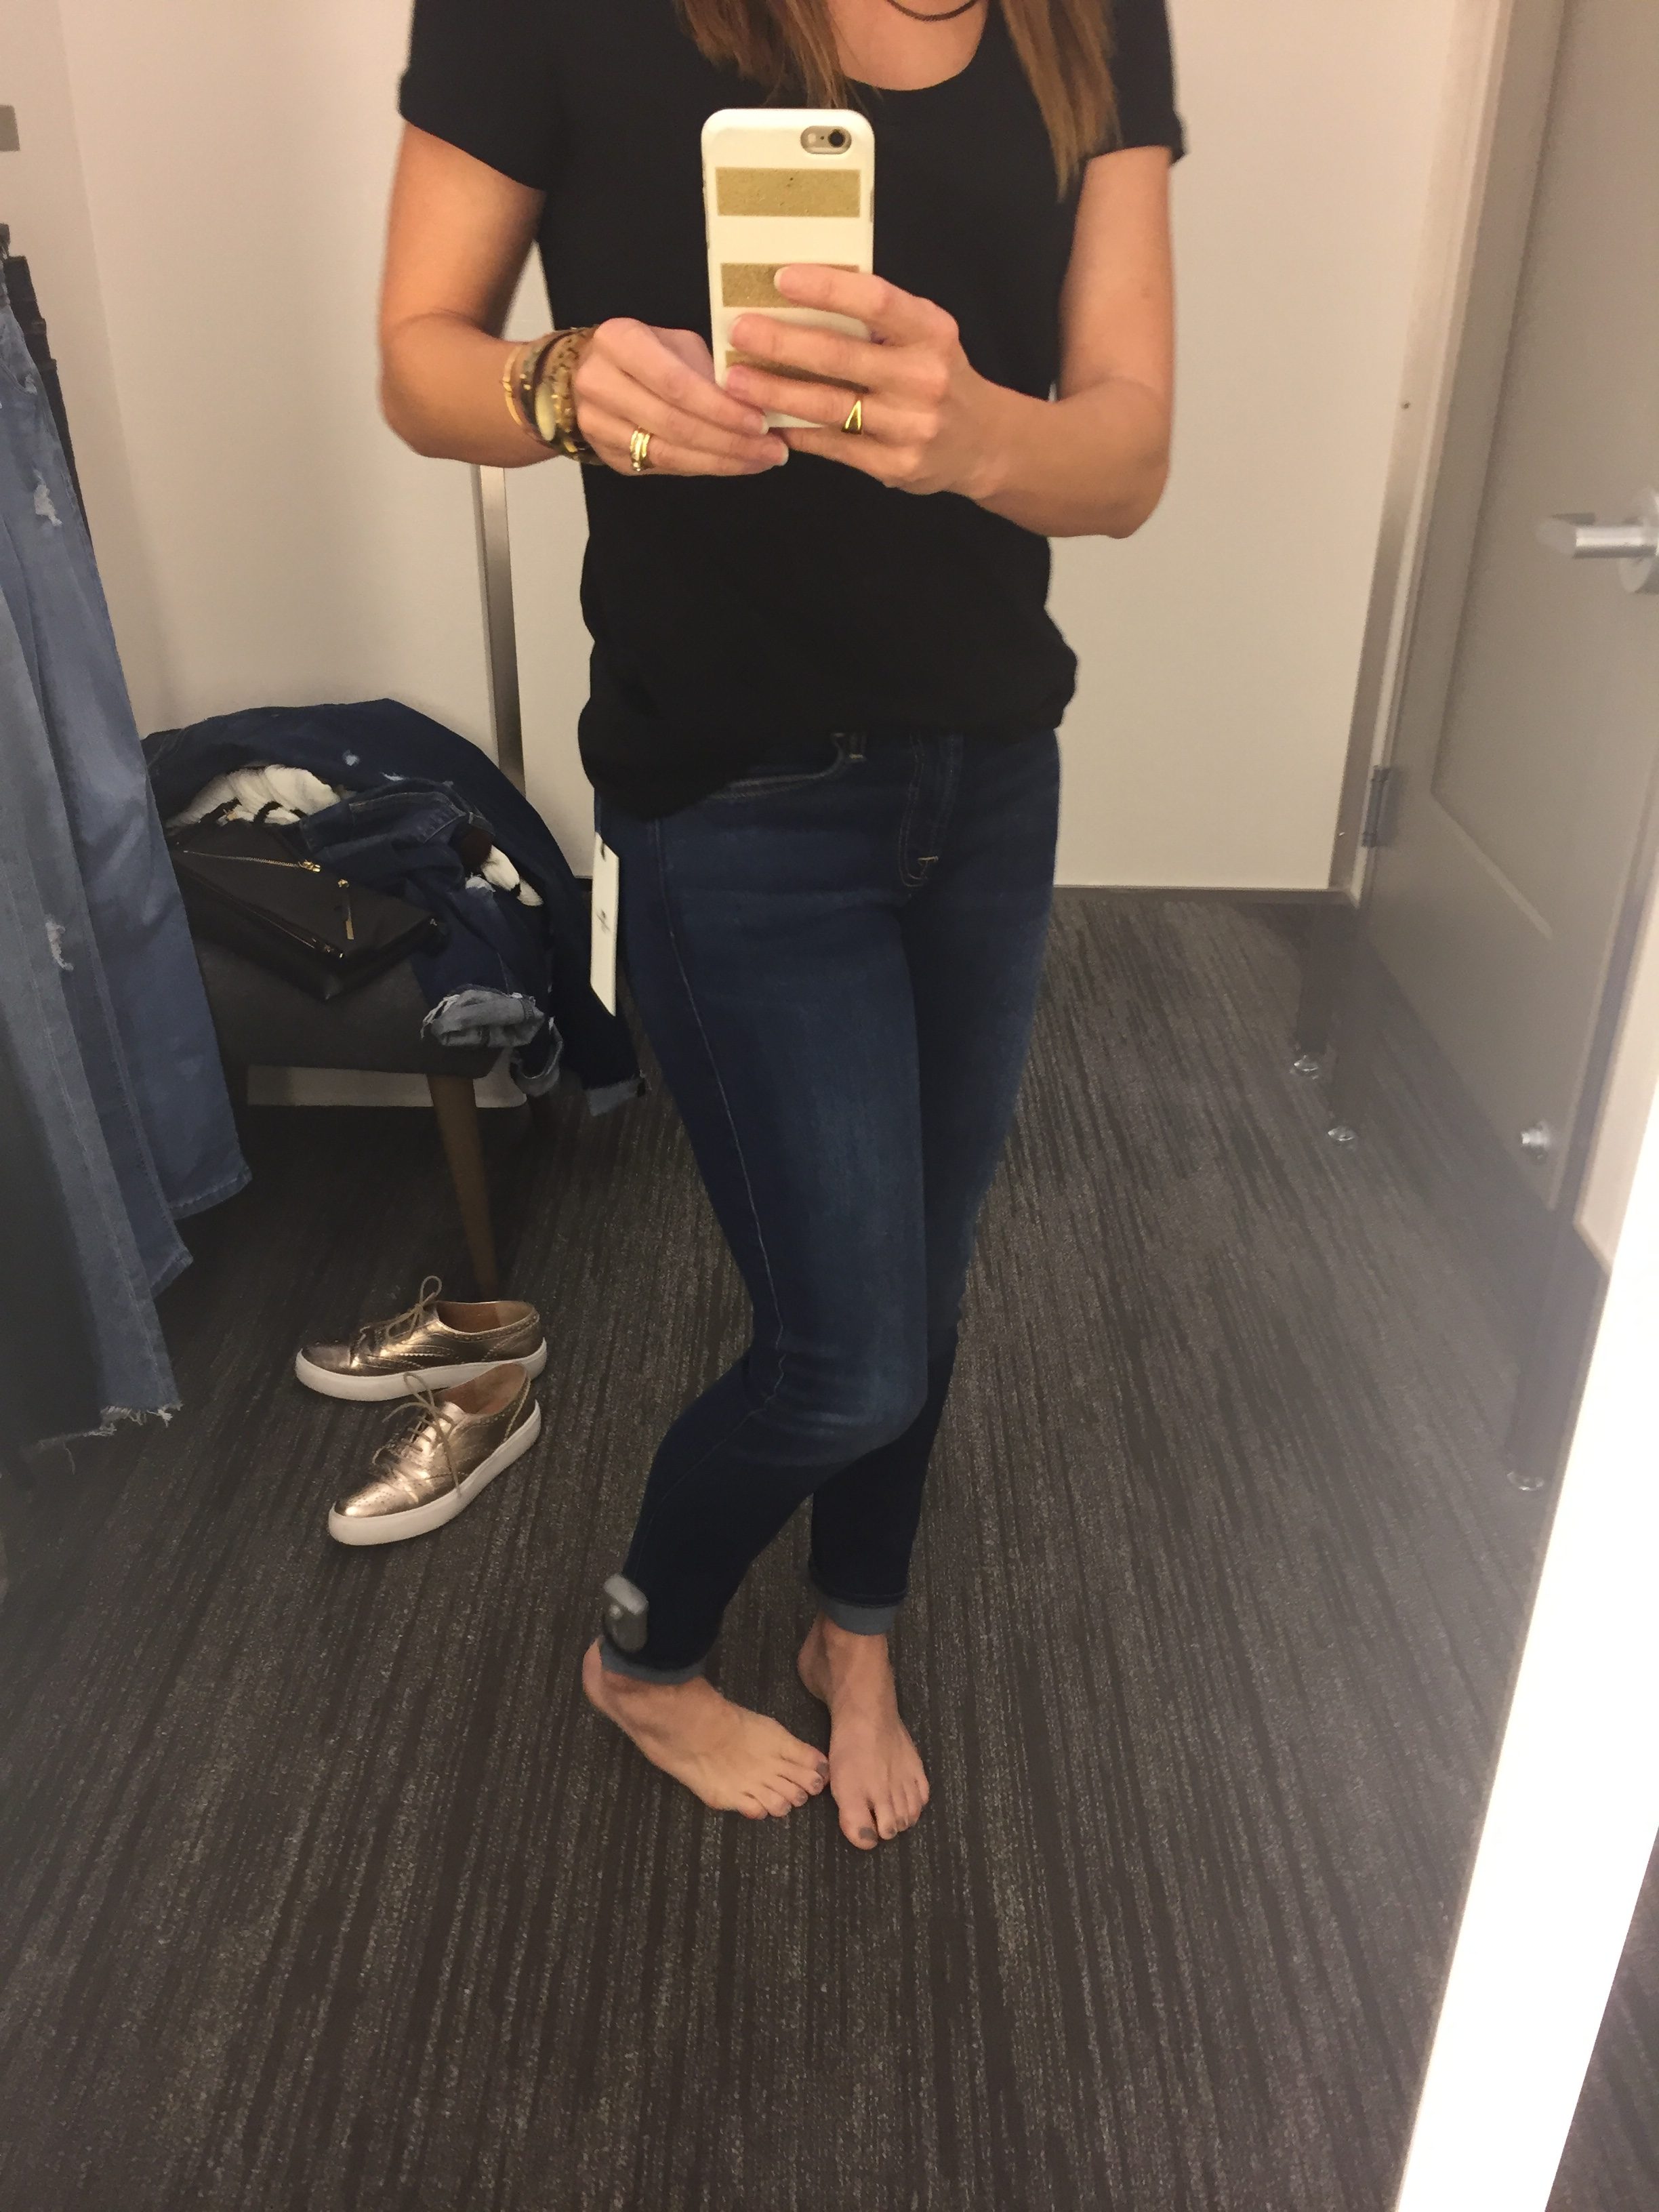 jean shopping, denim, skinny jeans, designer denim, everyday style, shopping, tips for buying jeans, my style, method39, find your fit, current elliott, frame, seven for all mankind, rag and bone